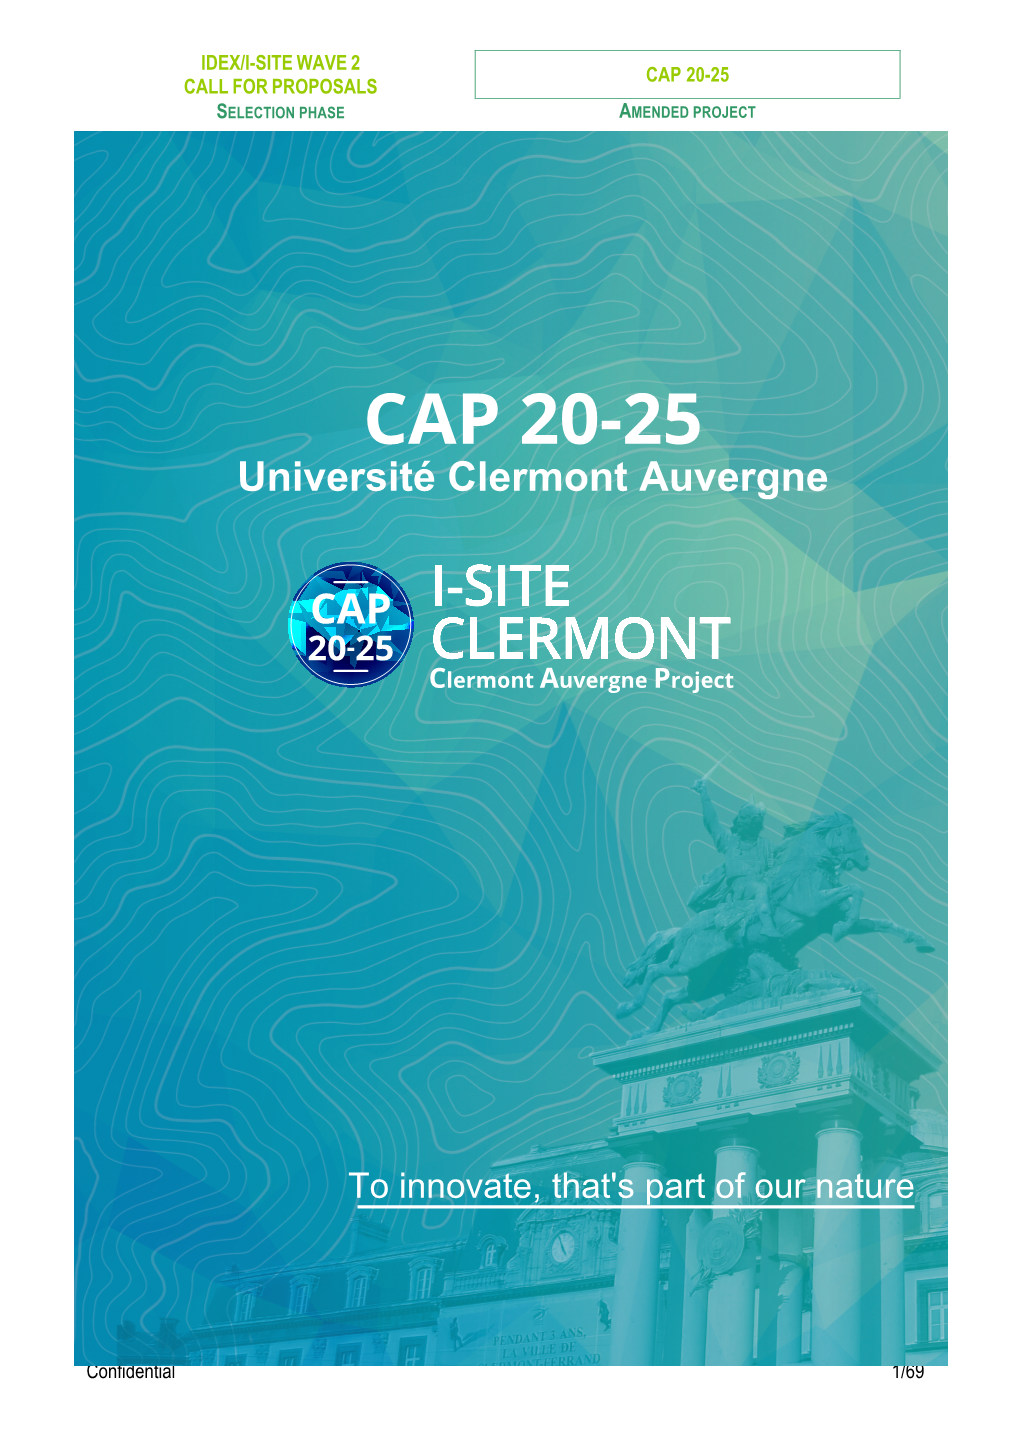 Cap 20-25 Call for Proposals Selection Phase Amended Project